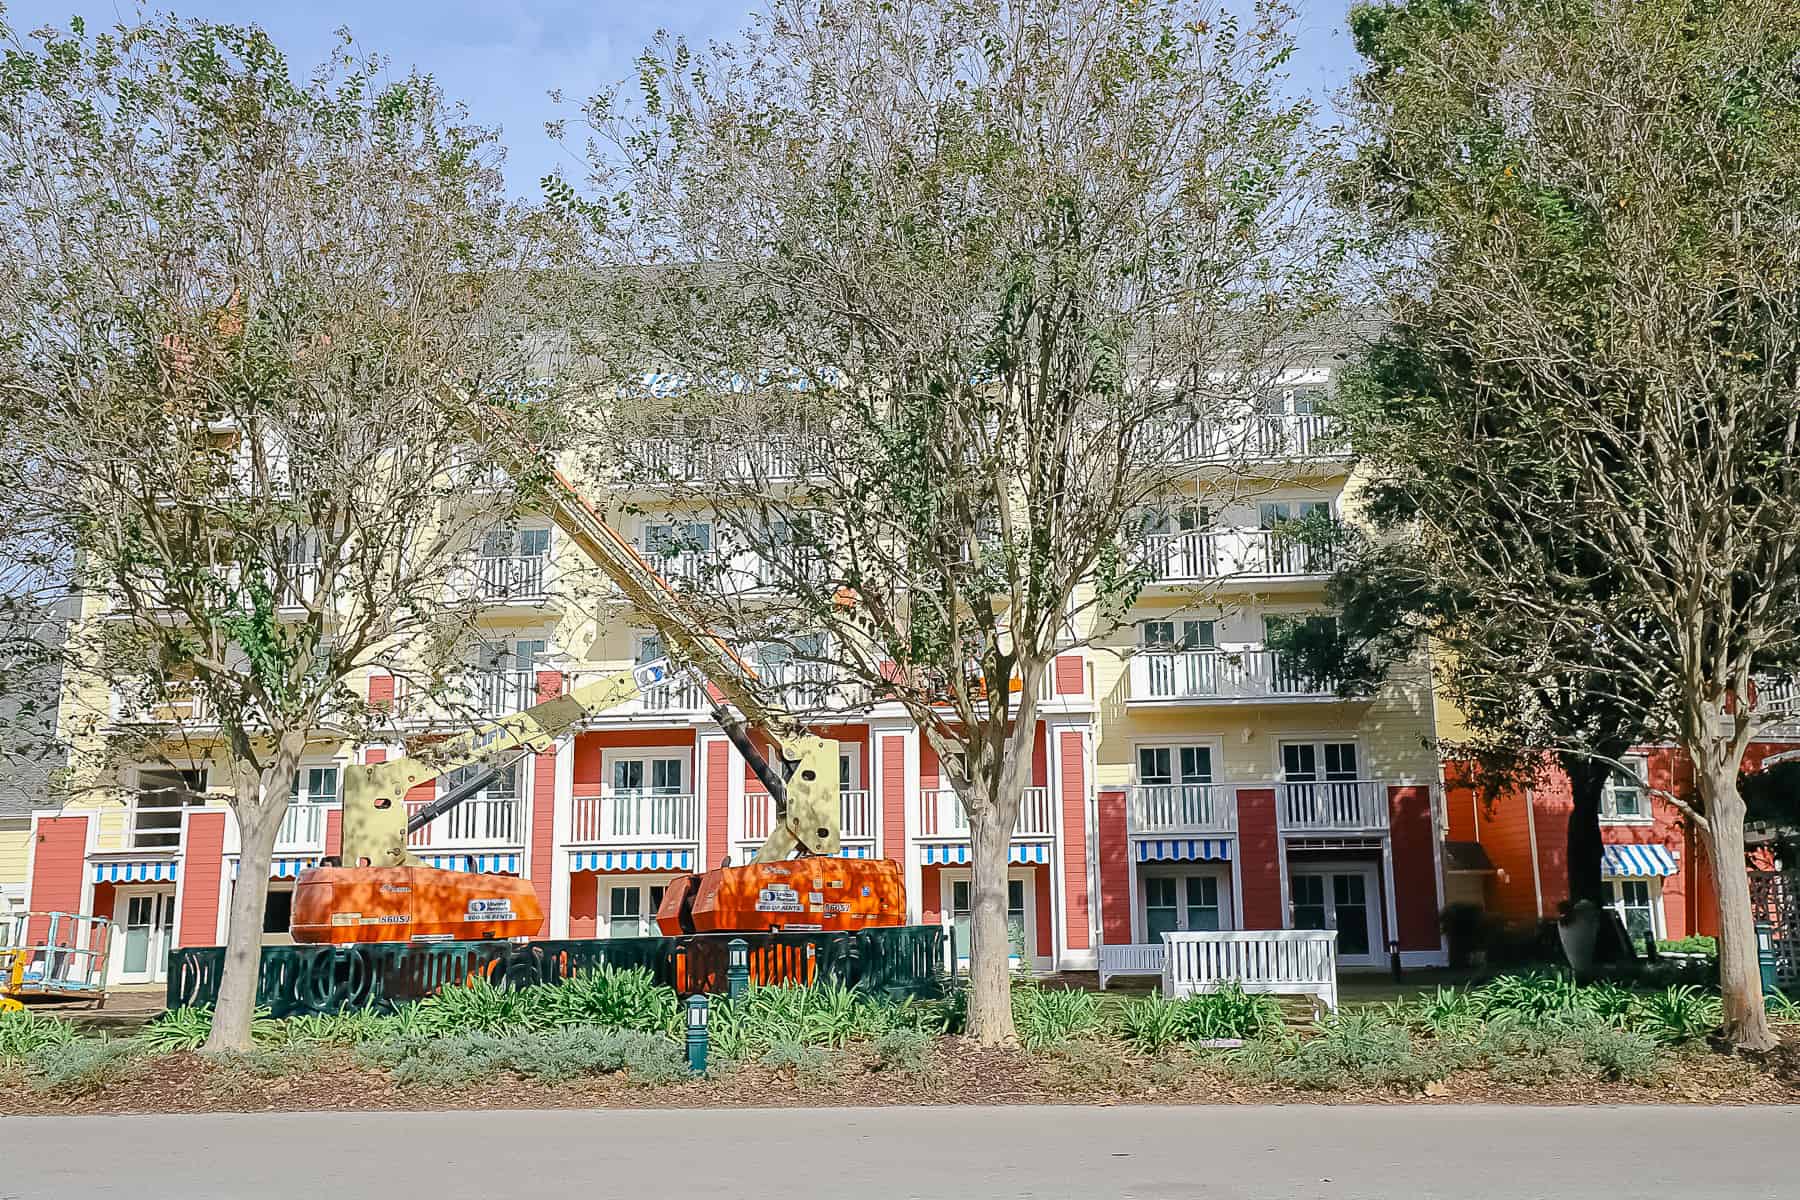 An updated photo of the same area that shows new red and yellow paint and blue and white awnings at Disney's Boardwalk Villas. 